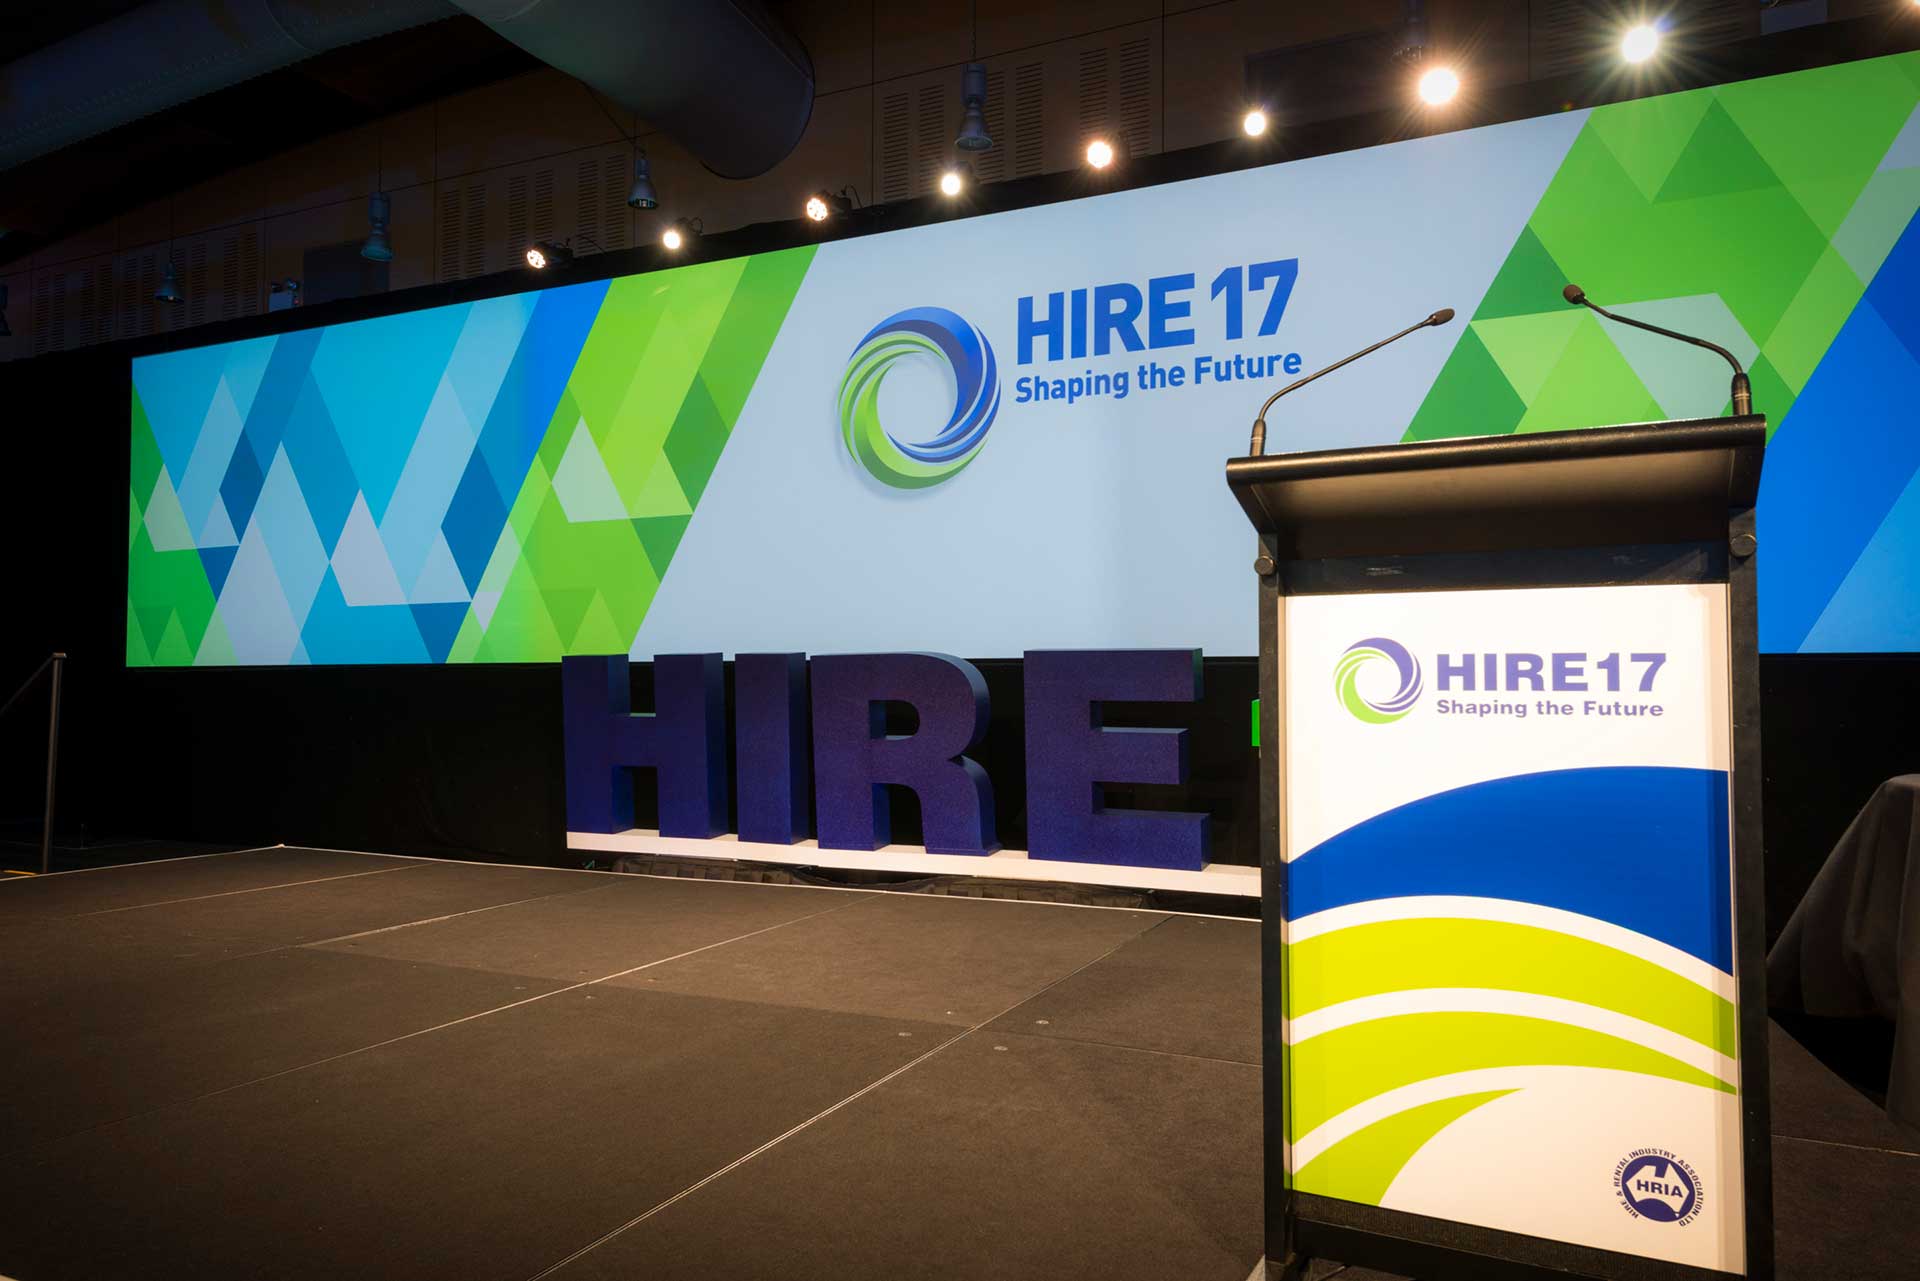 Hire17 Shaping the Future